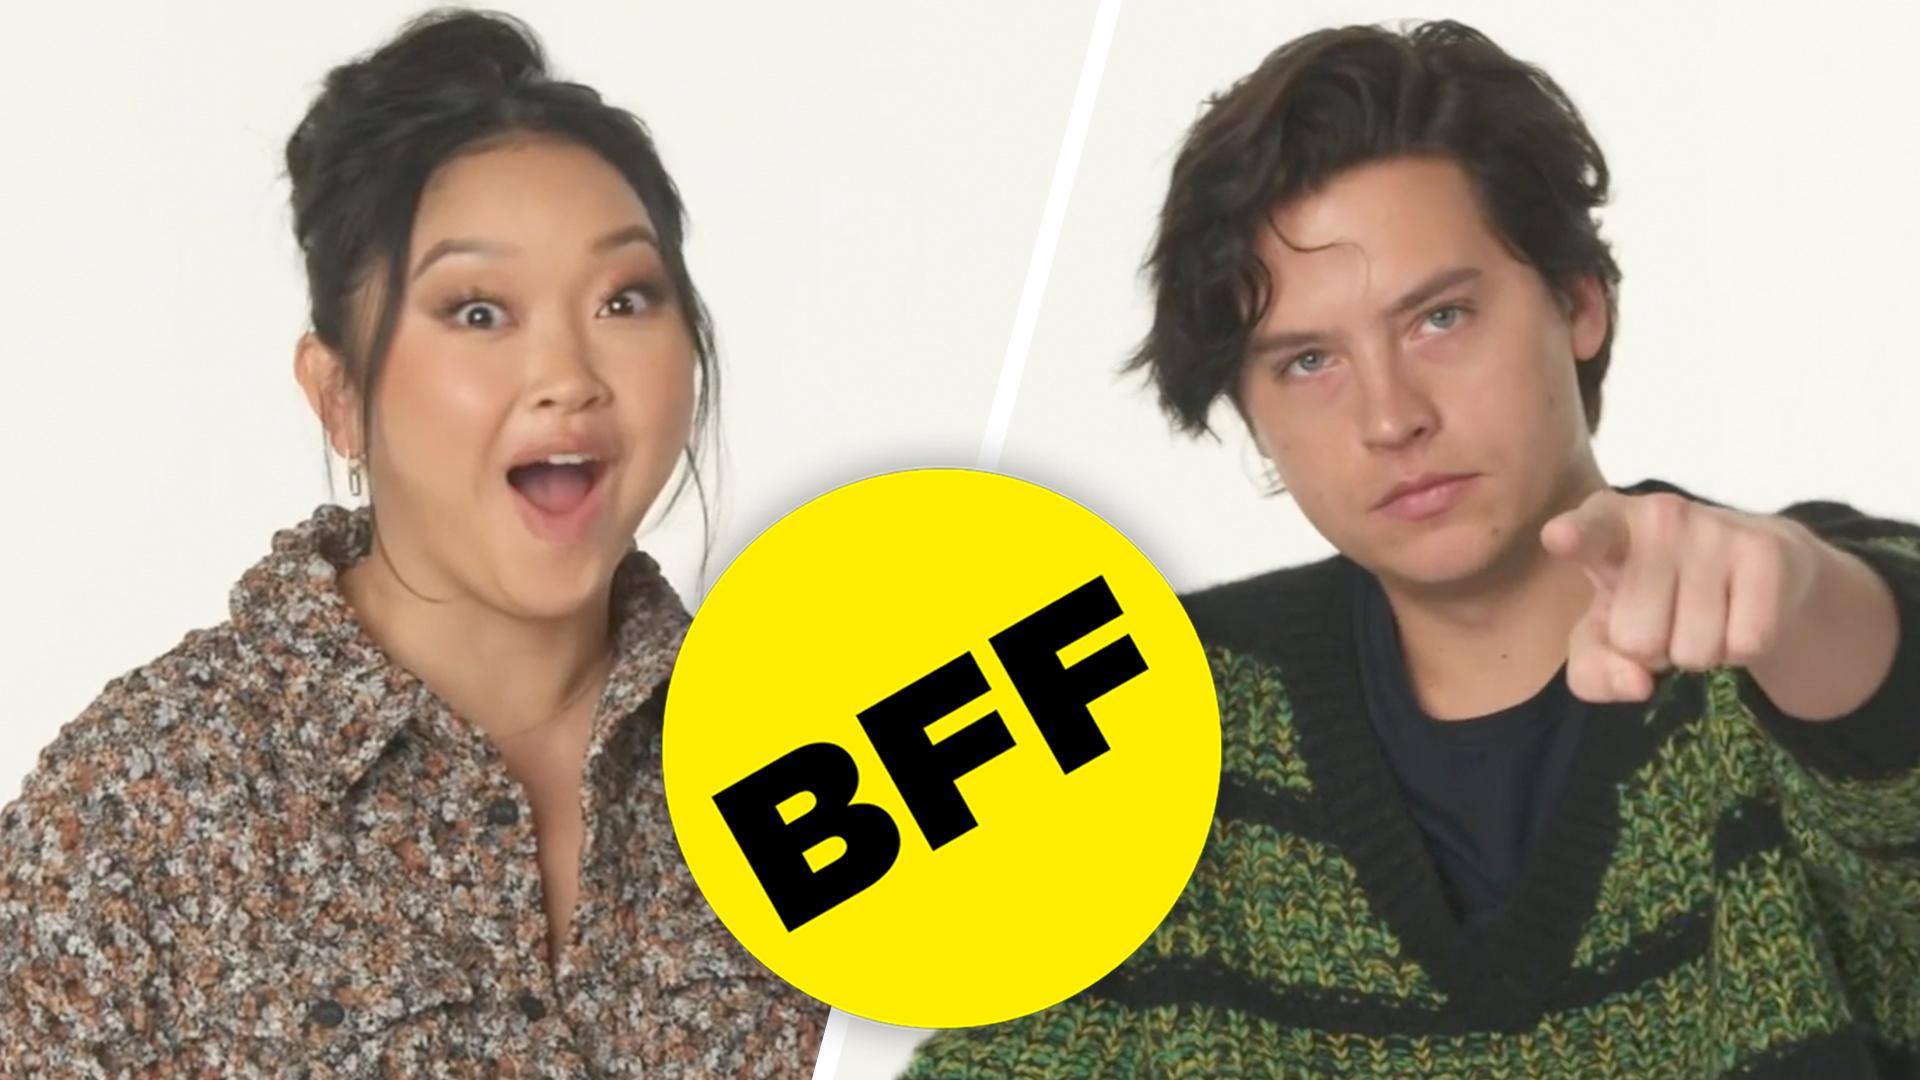 Ayesha Perry Sex Videos Hd Com - Cole Sprouse and Lana Condor Take The Co-Star Test